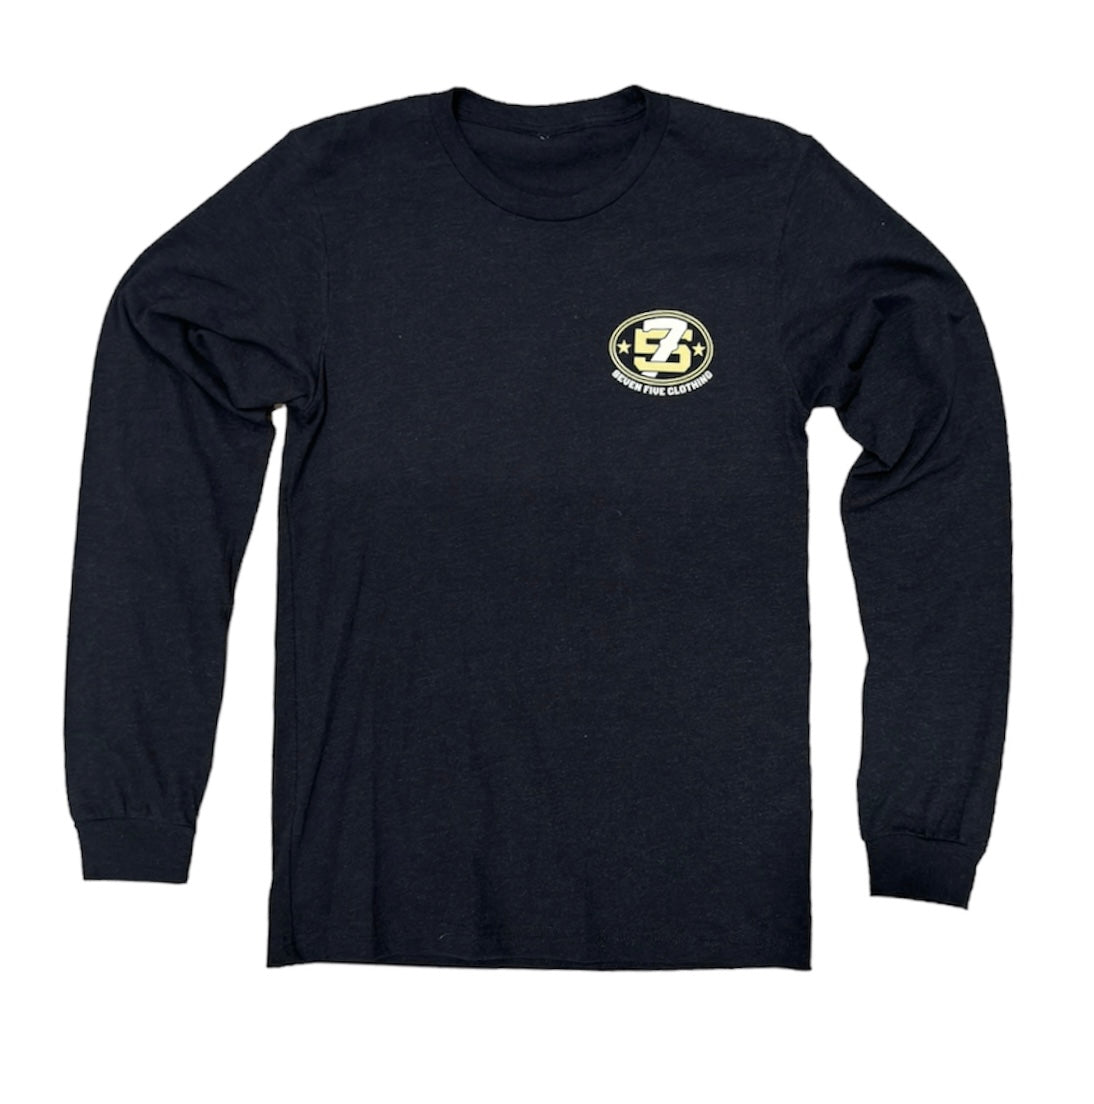 The Protector - Heather Black Longsleeve - 7Five Clothing Co.